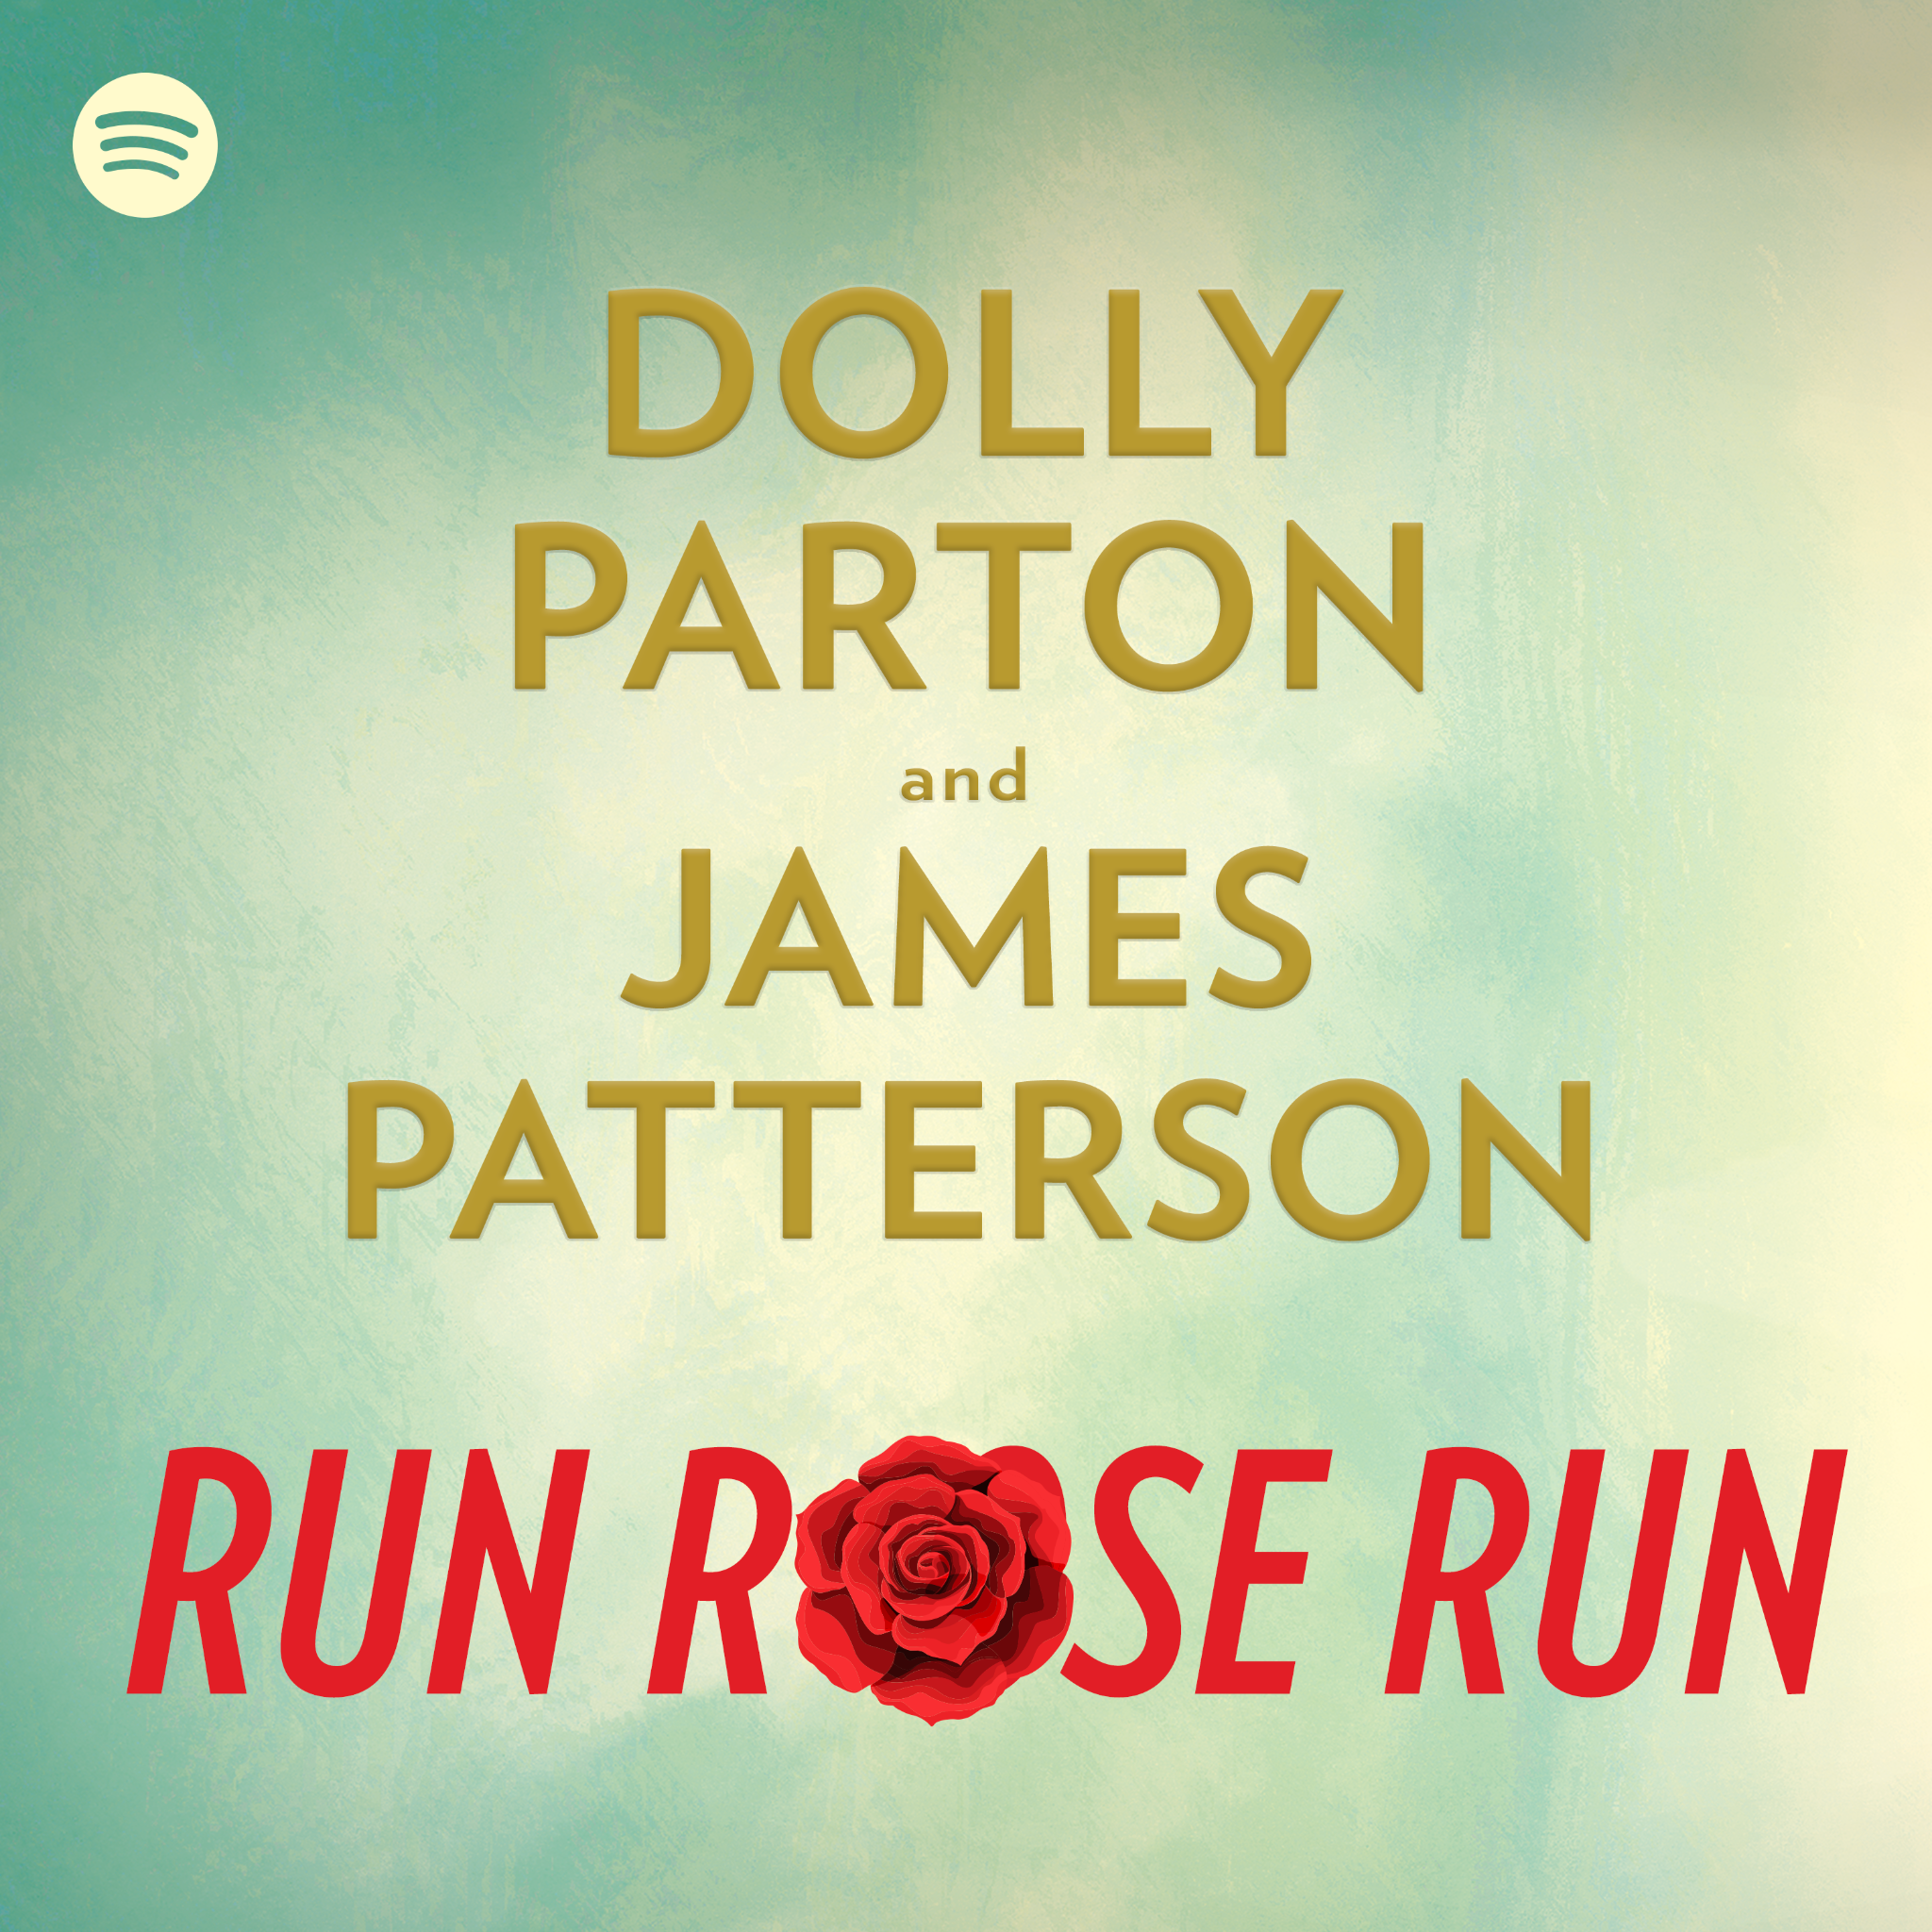 Spotify Announces New Bookcast “Run, Rose, Run” Featuring Dolly Parton And James Patterson